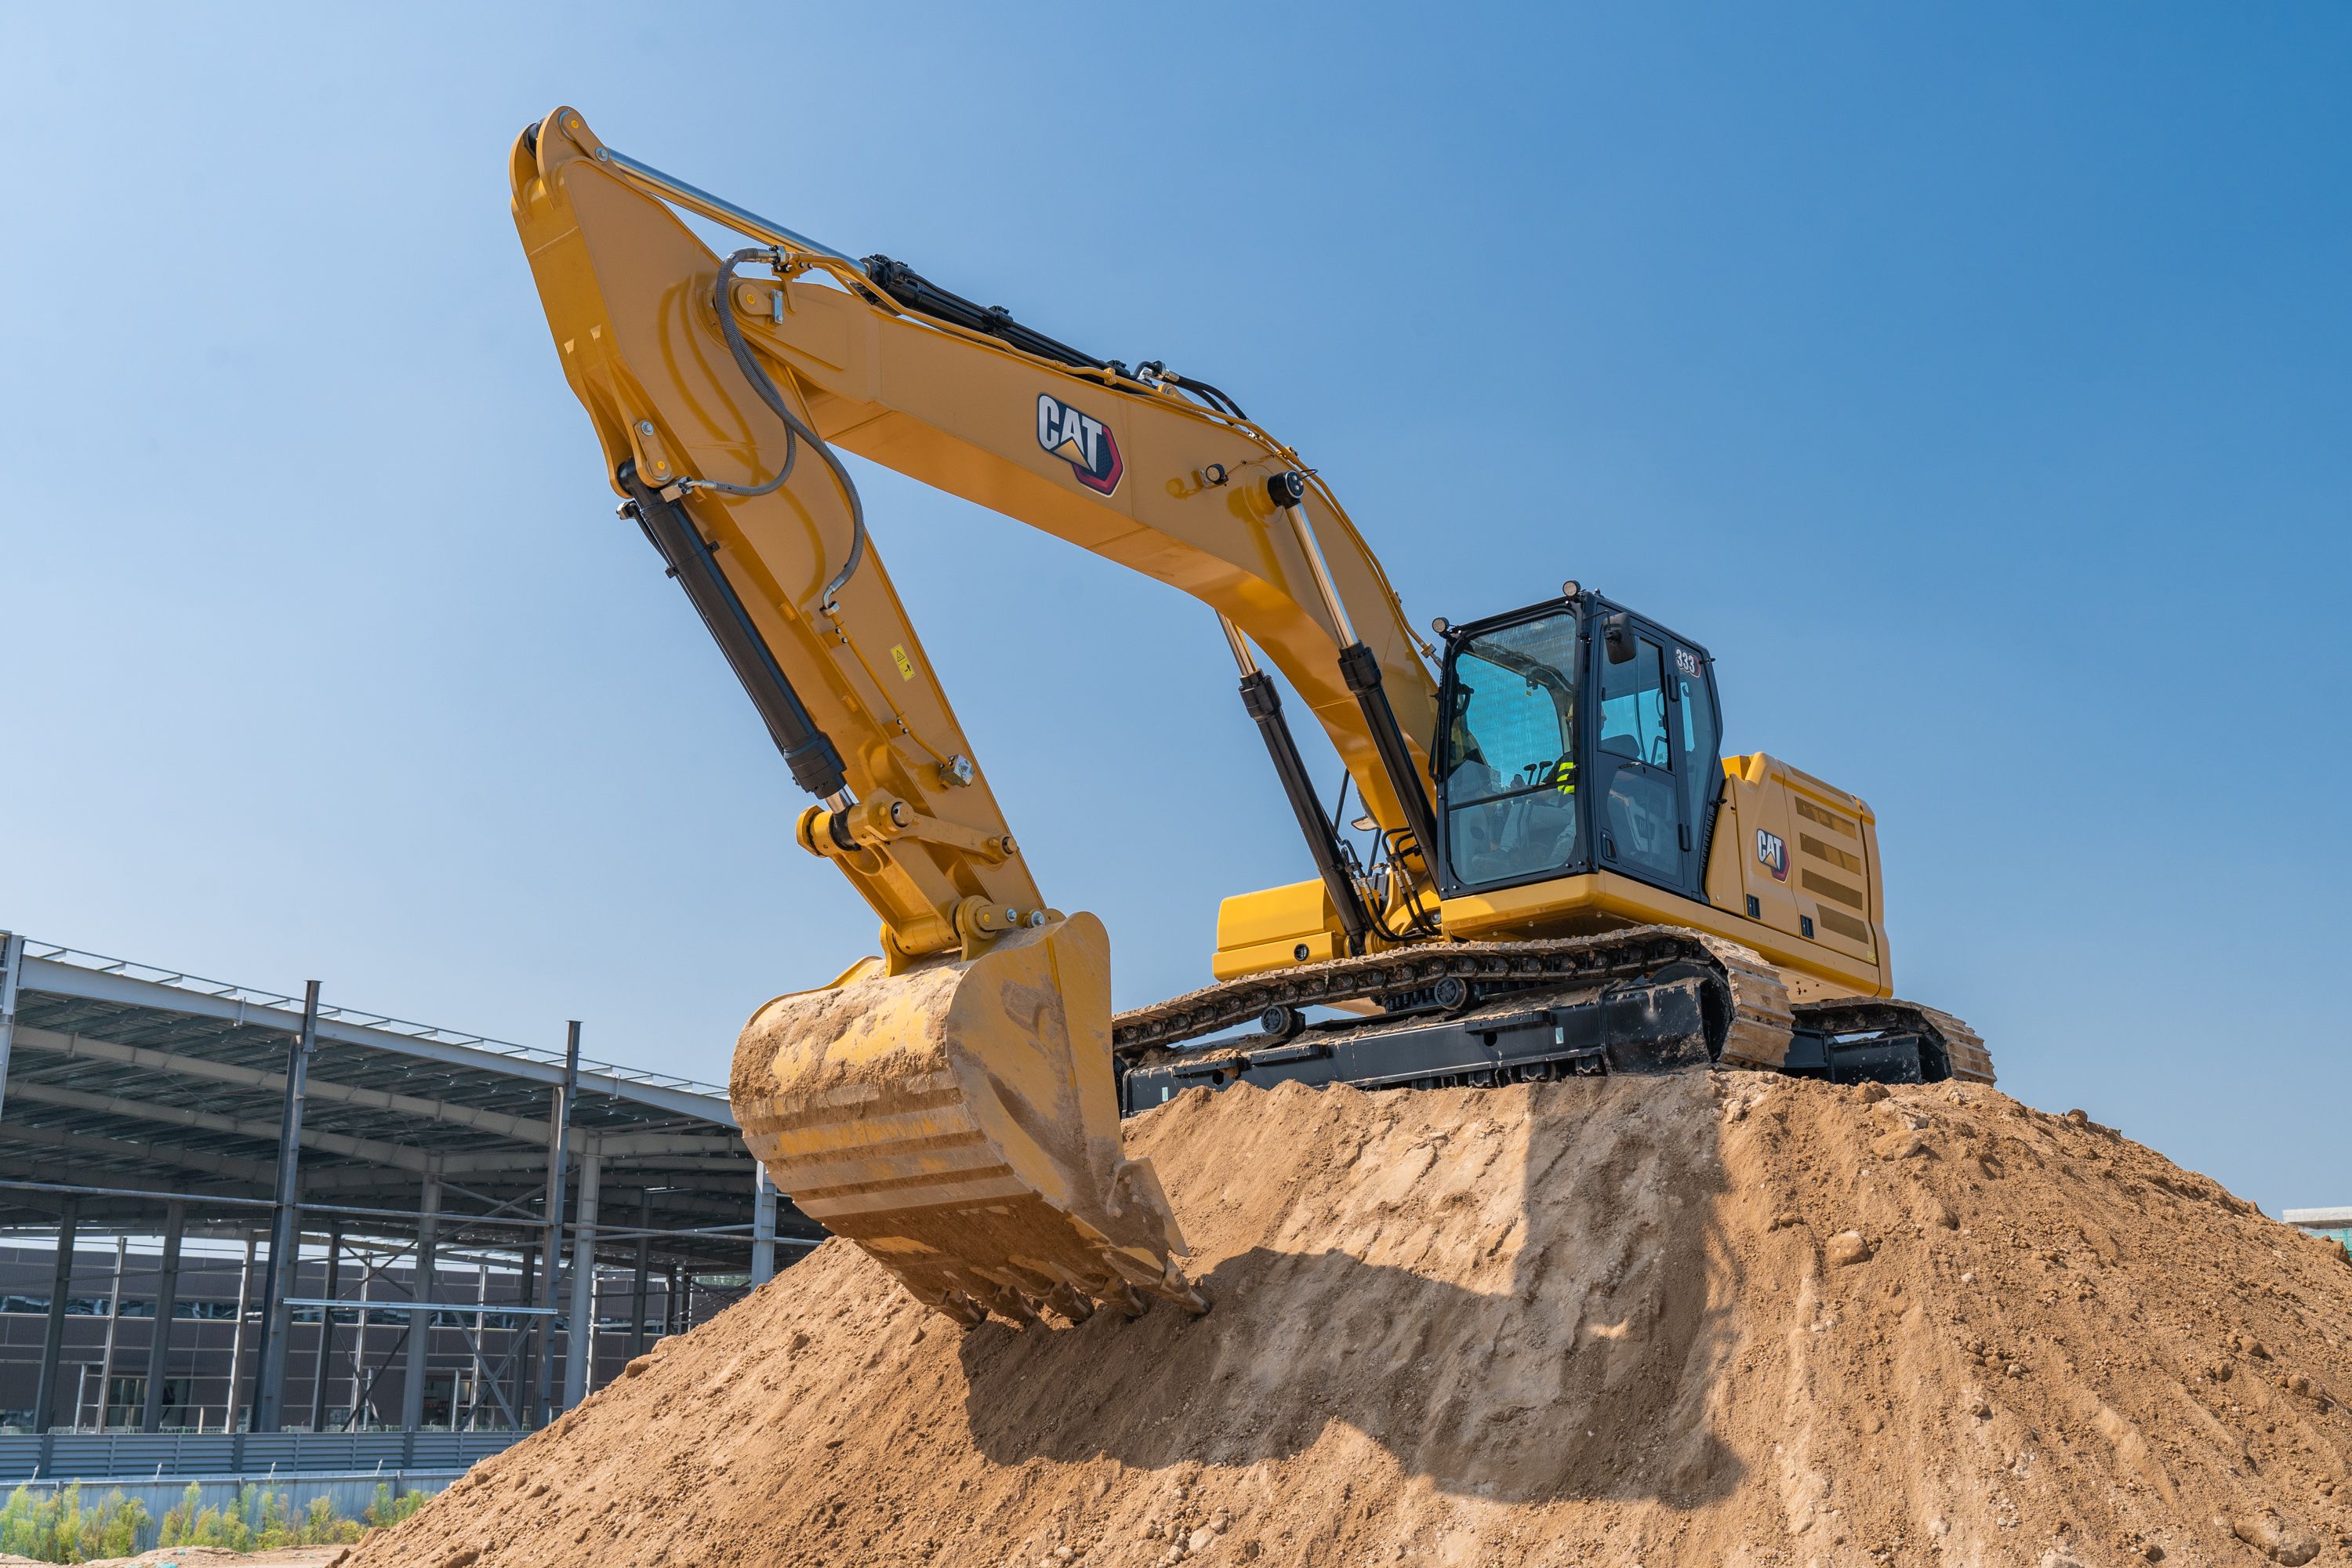 Why Buy Used Equipment From a Caterpillar Dealer?